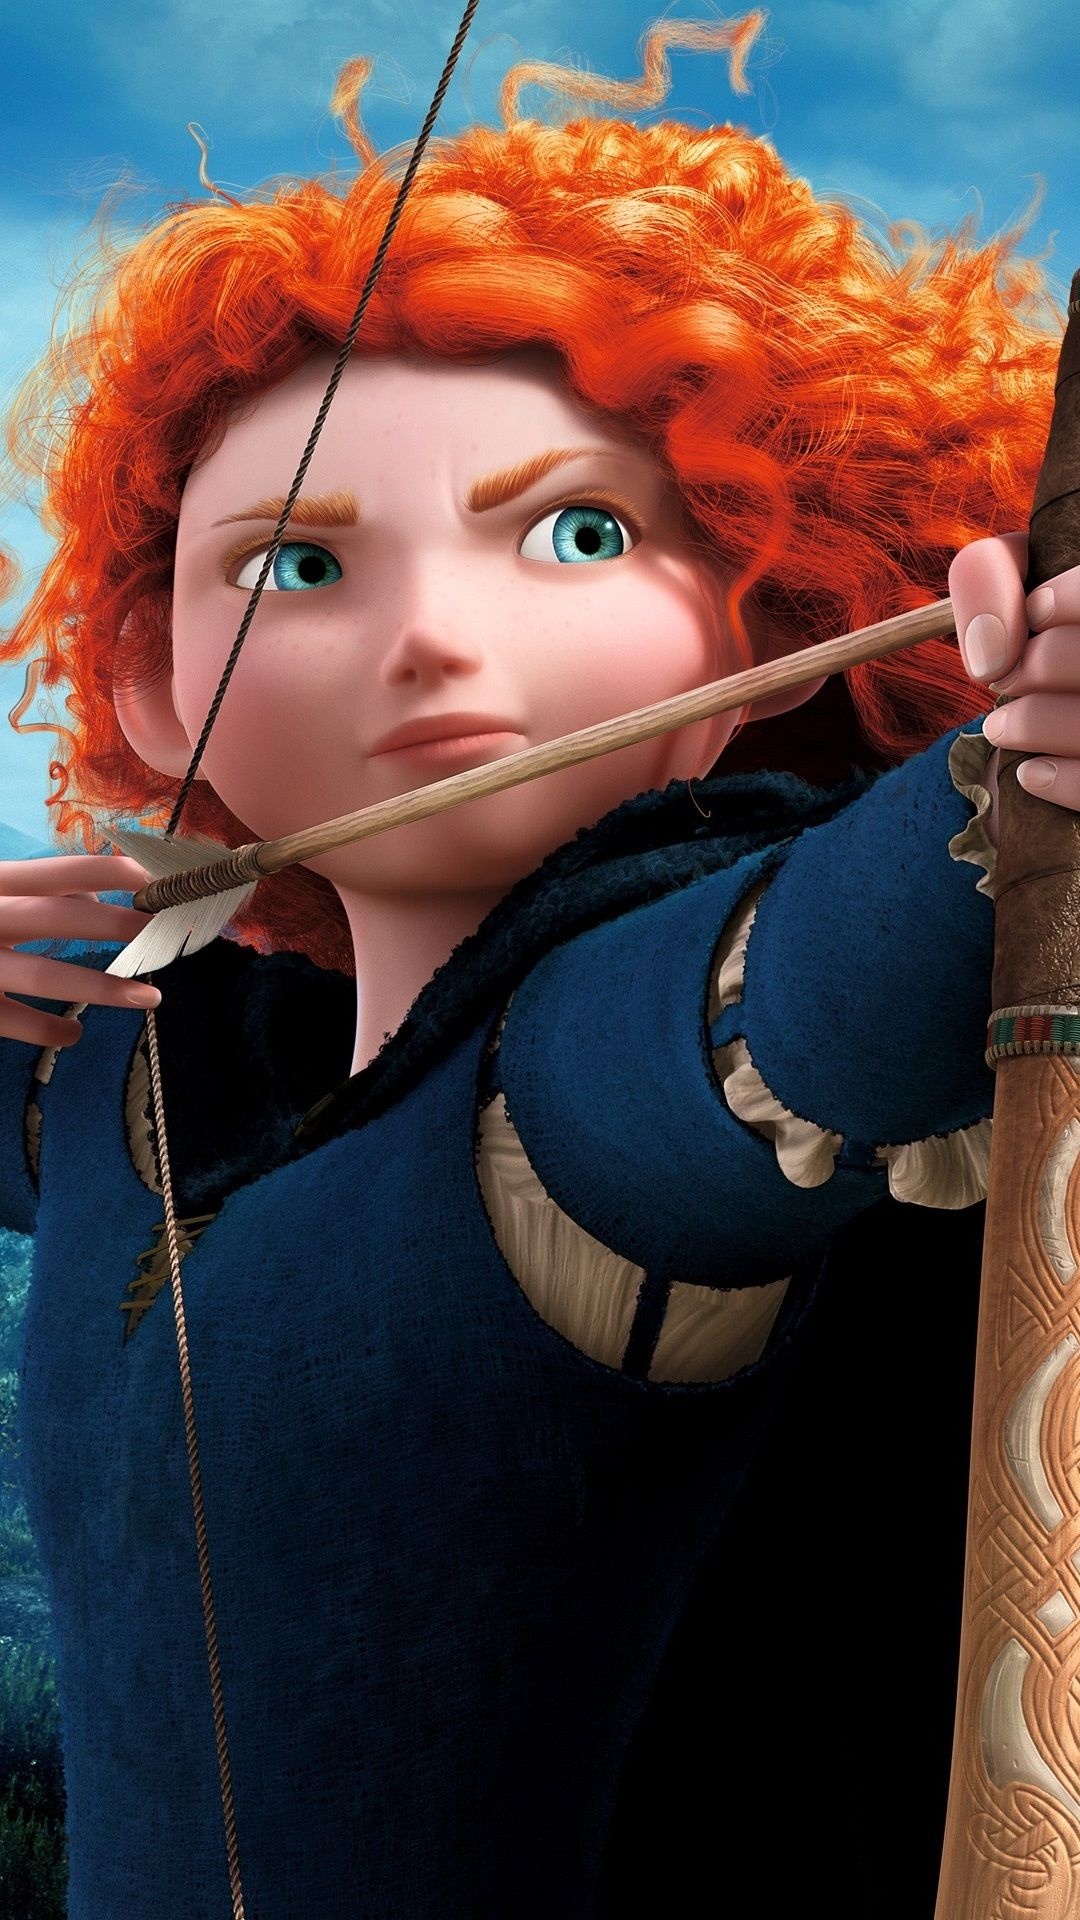 Brave iPhone wallpapers, Princess Merida, Animated movie, Epic landscapes, 1080x1920 Full HD Phone